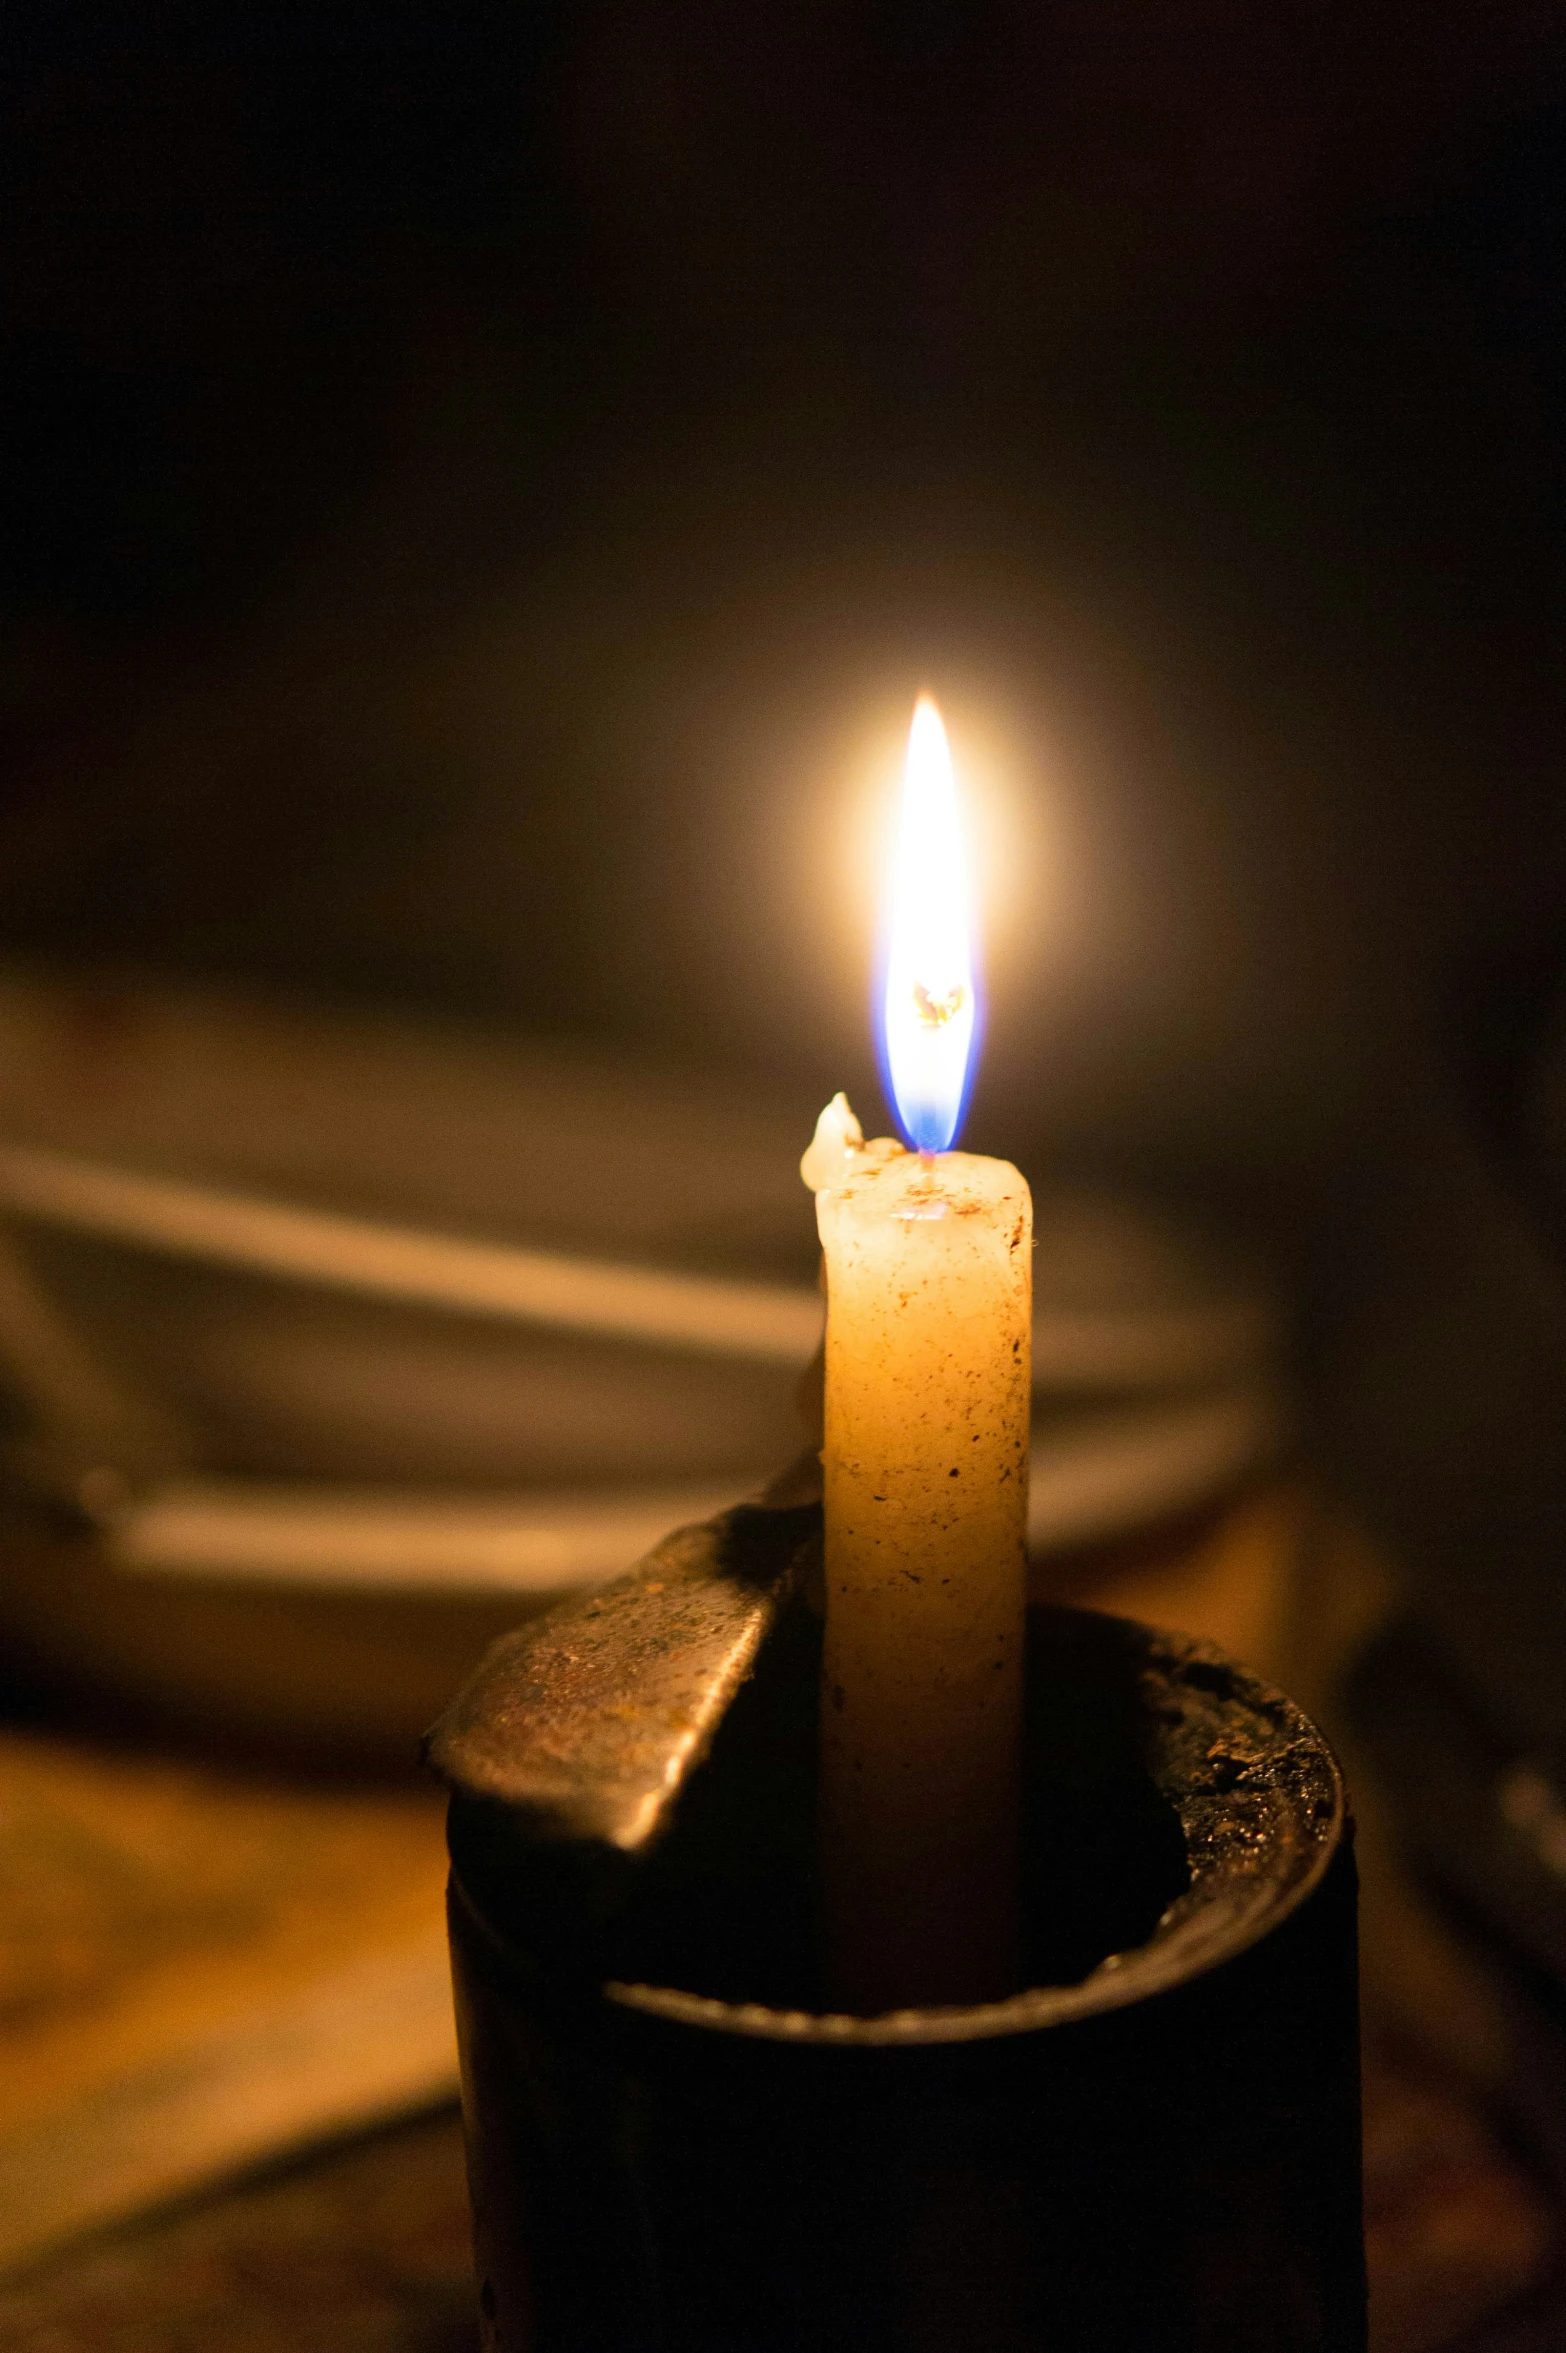 a single lit candle glowing in the dark